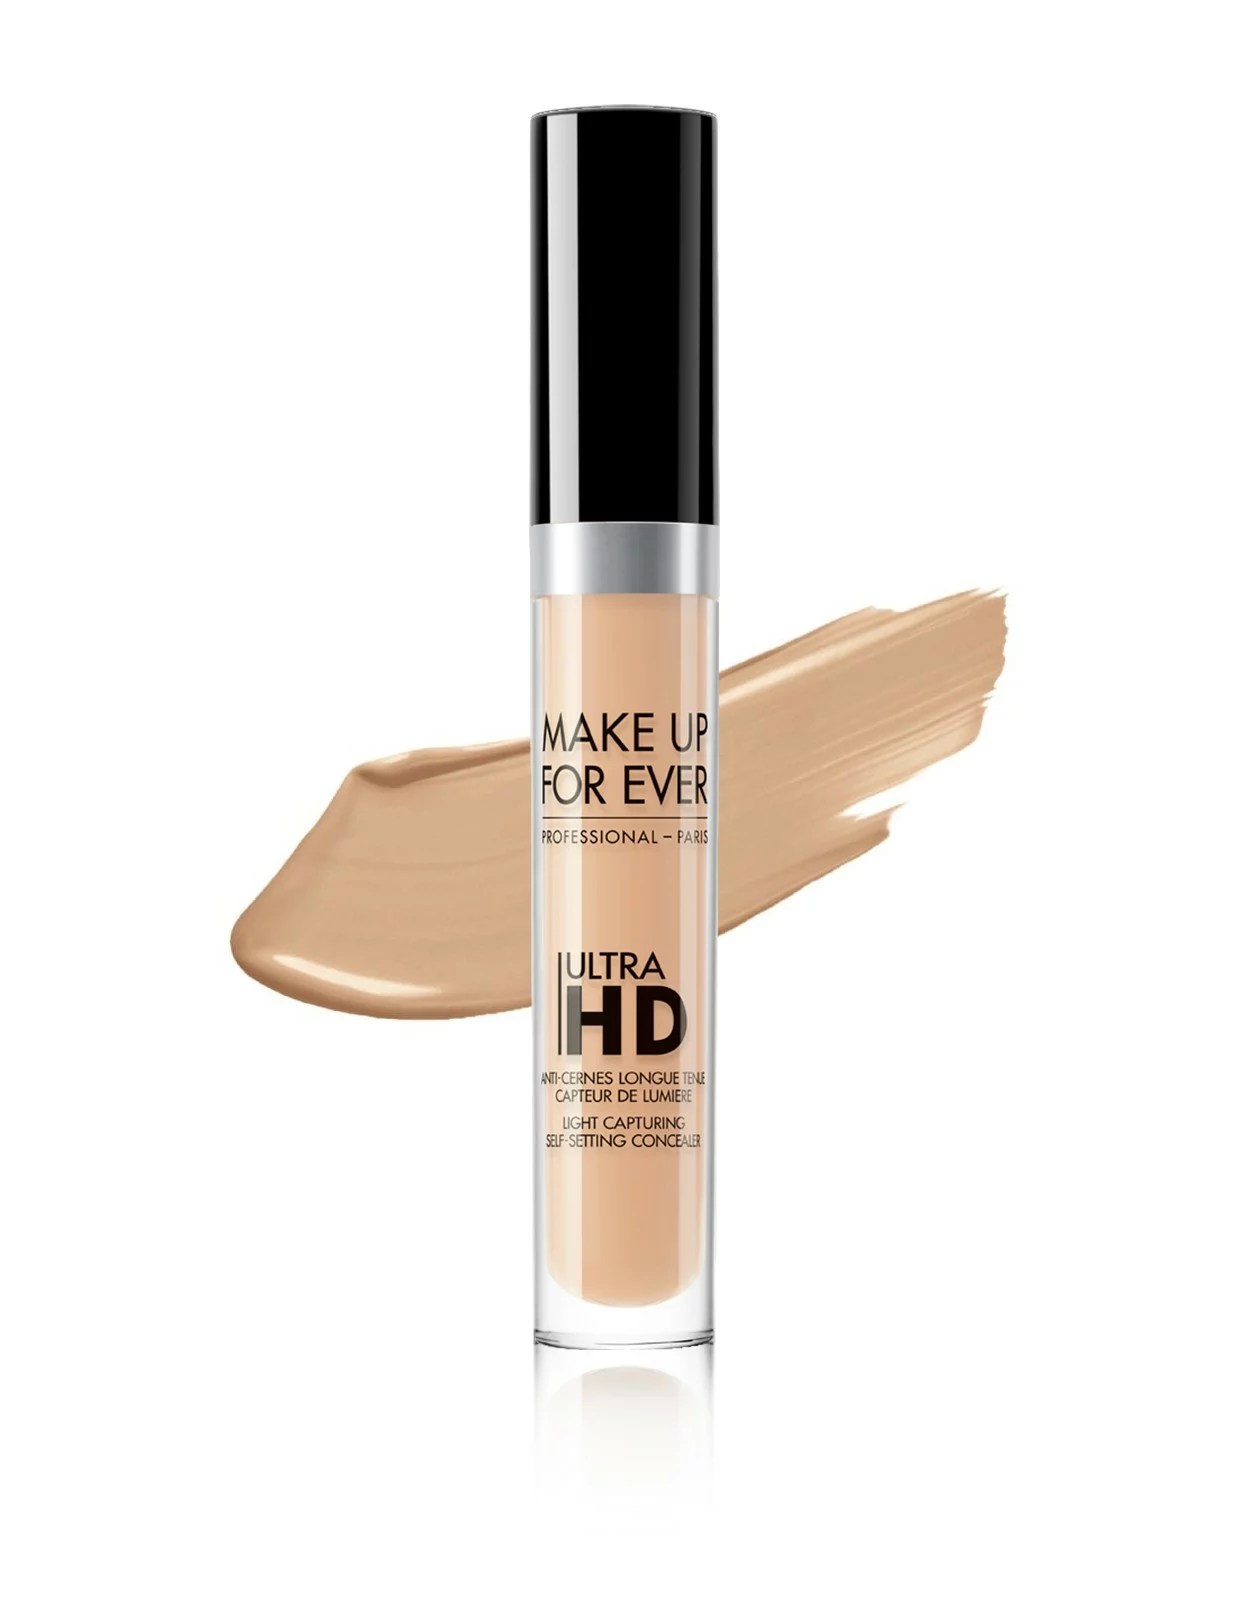 8 Long-Lasting Concealers All-Day Coverage | Well+Good